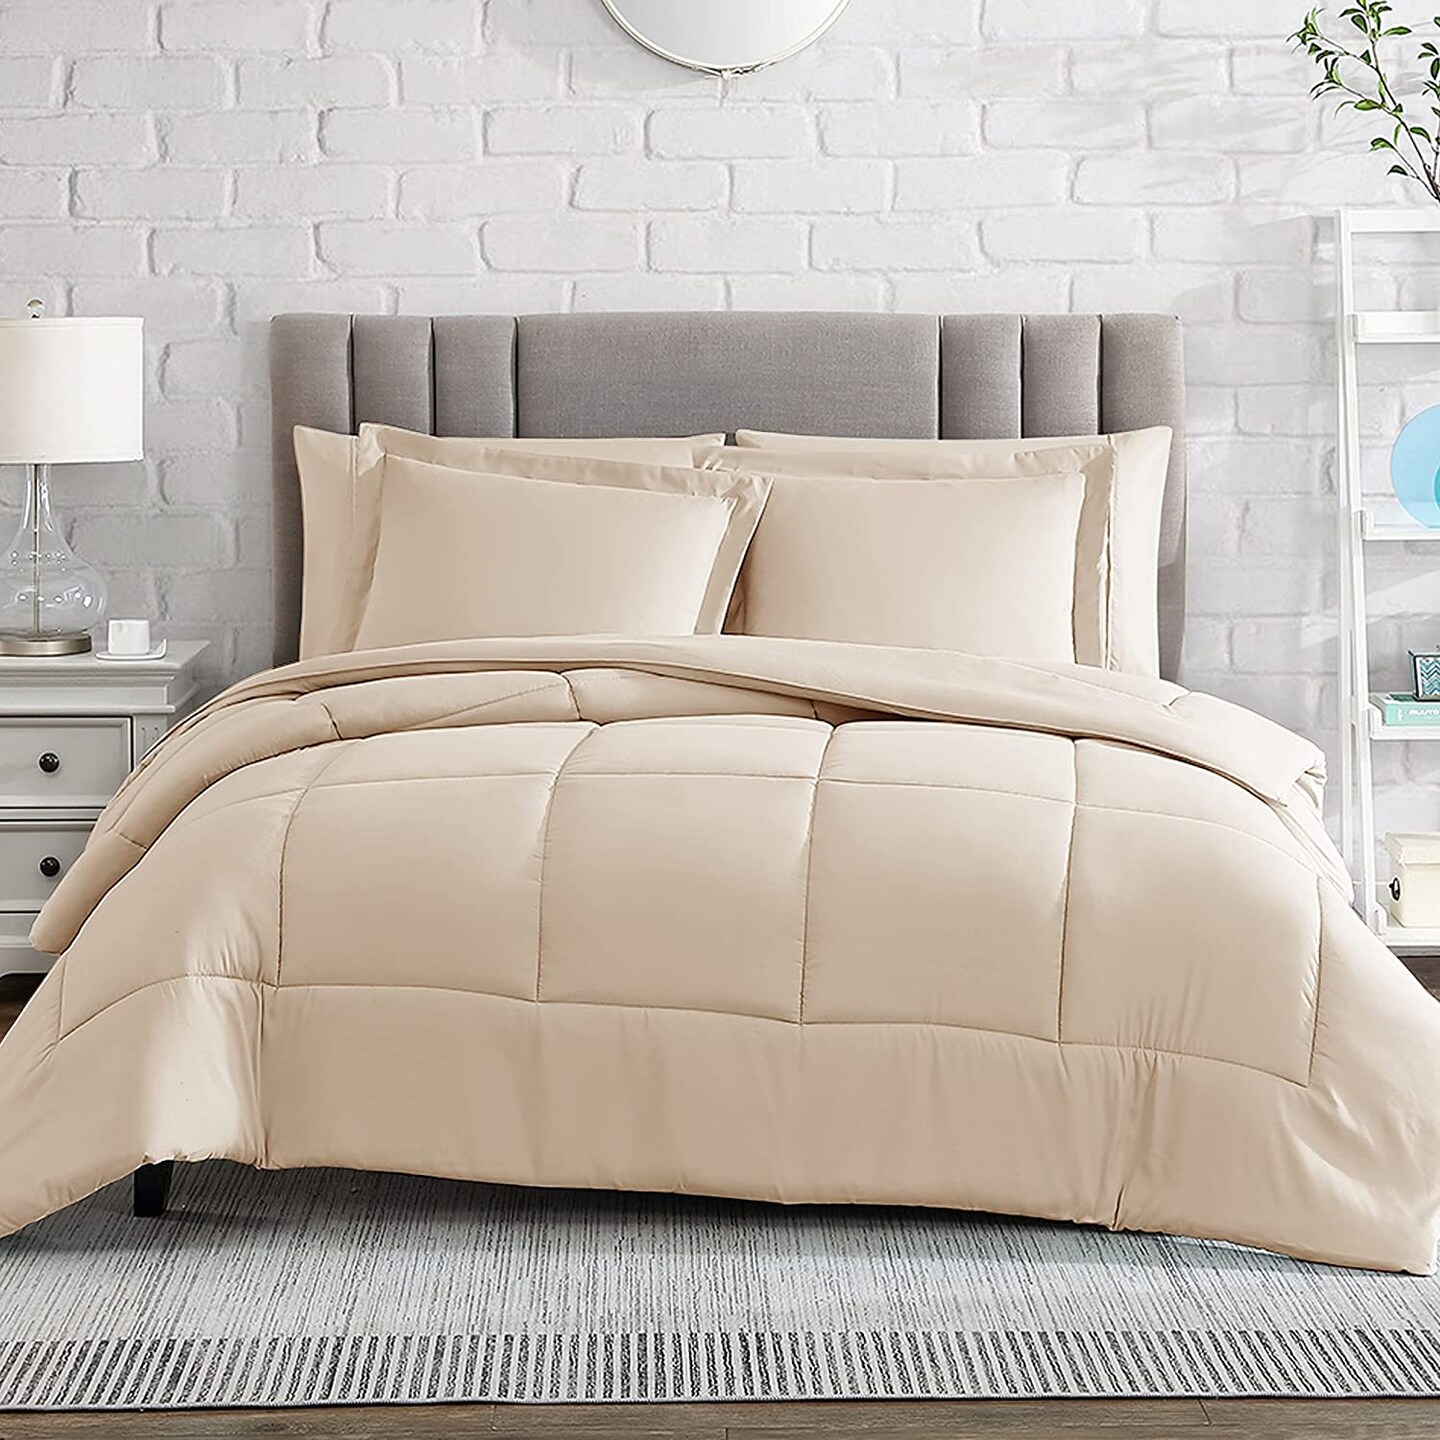 American Home Collection Down Alternative Comforter Set Extra Warm and Soft